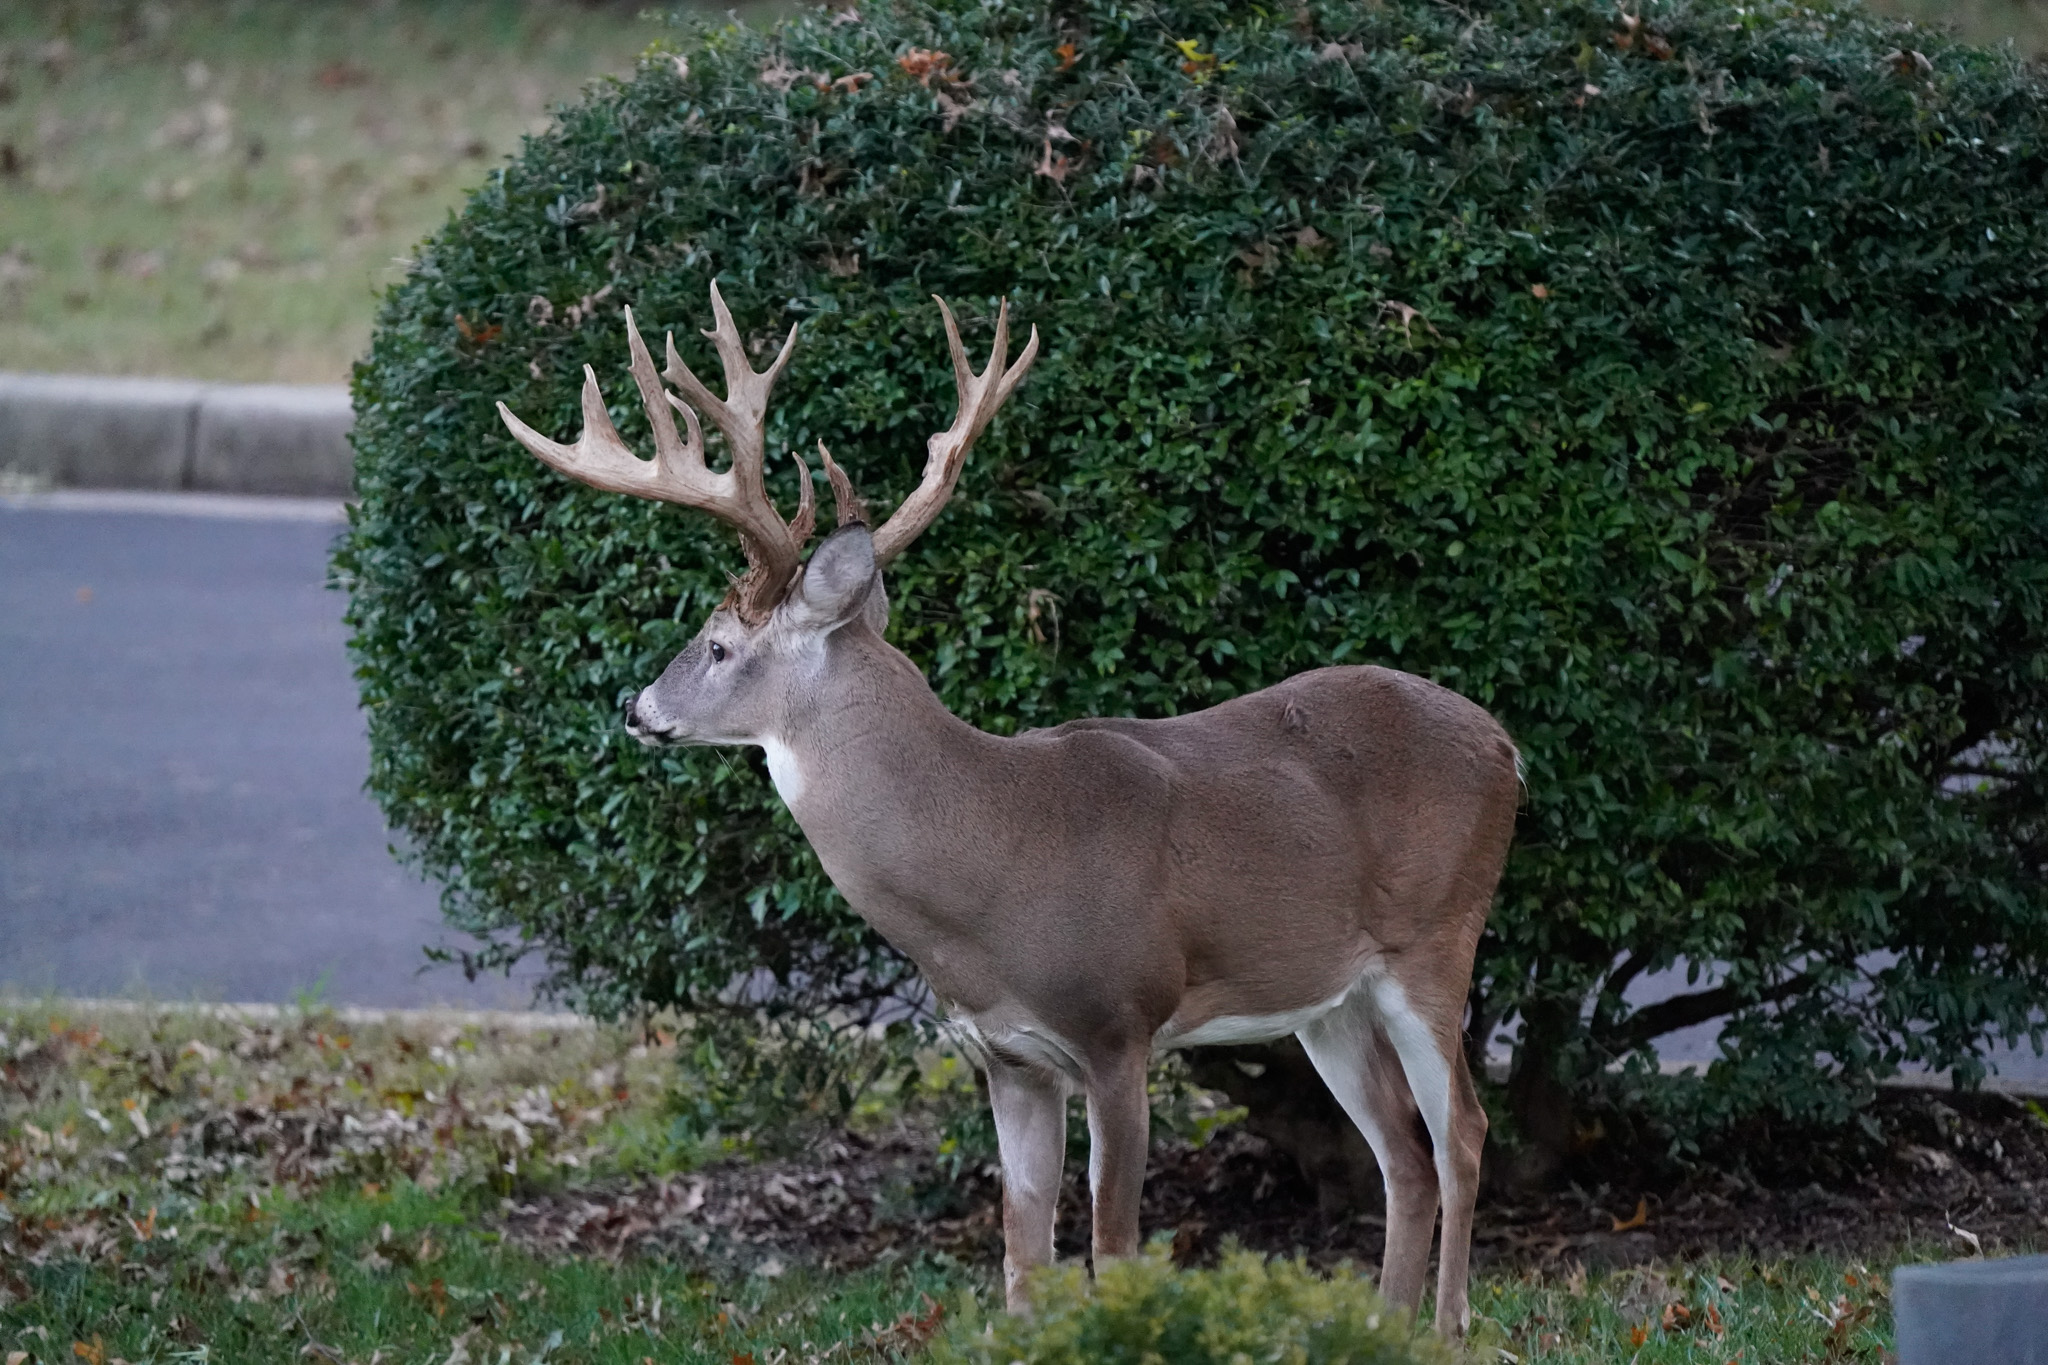 The giant Hollywood buck, by a road in Richmond.